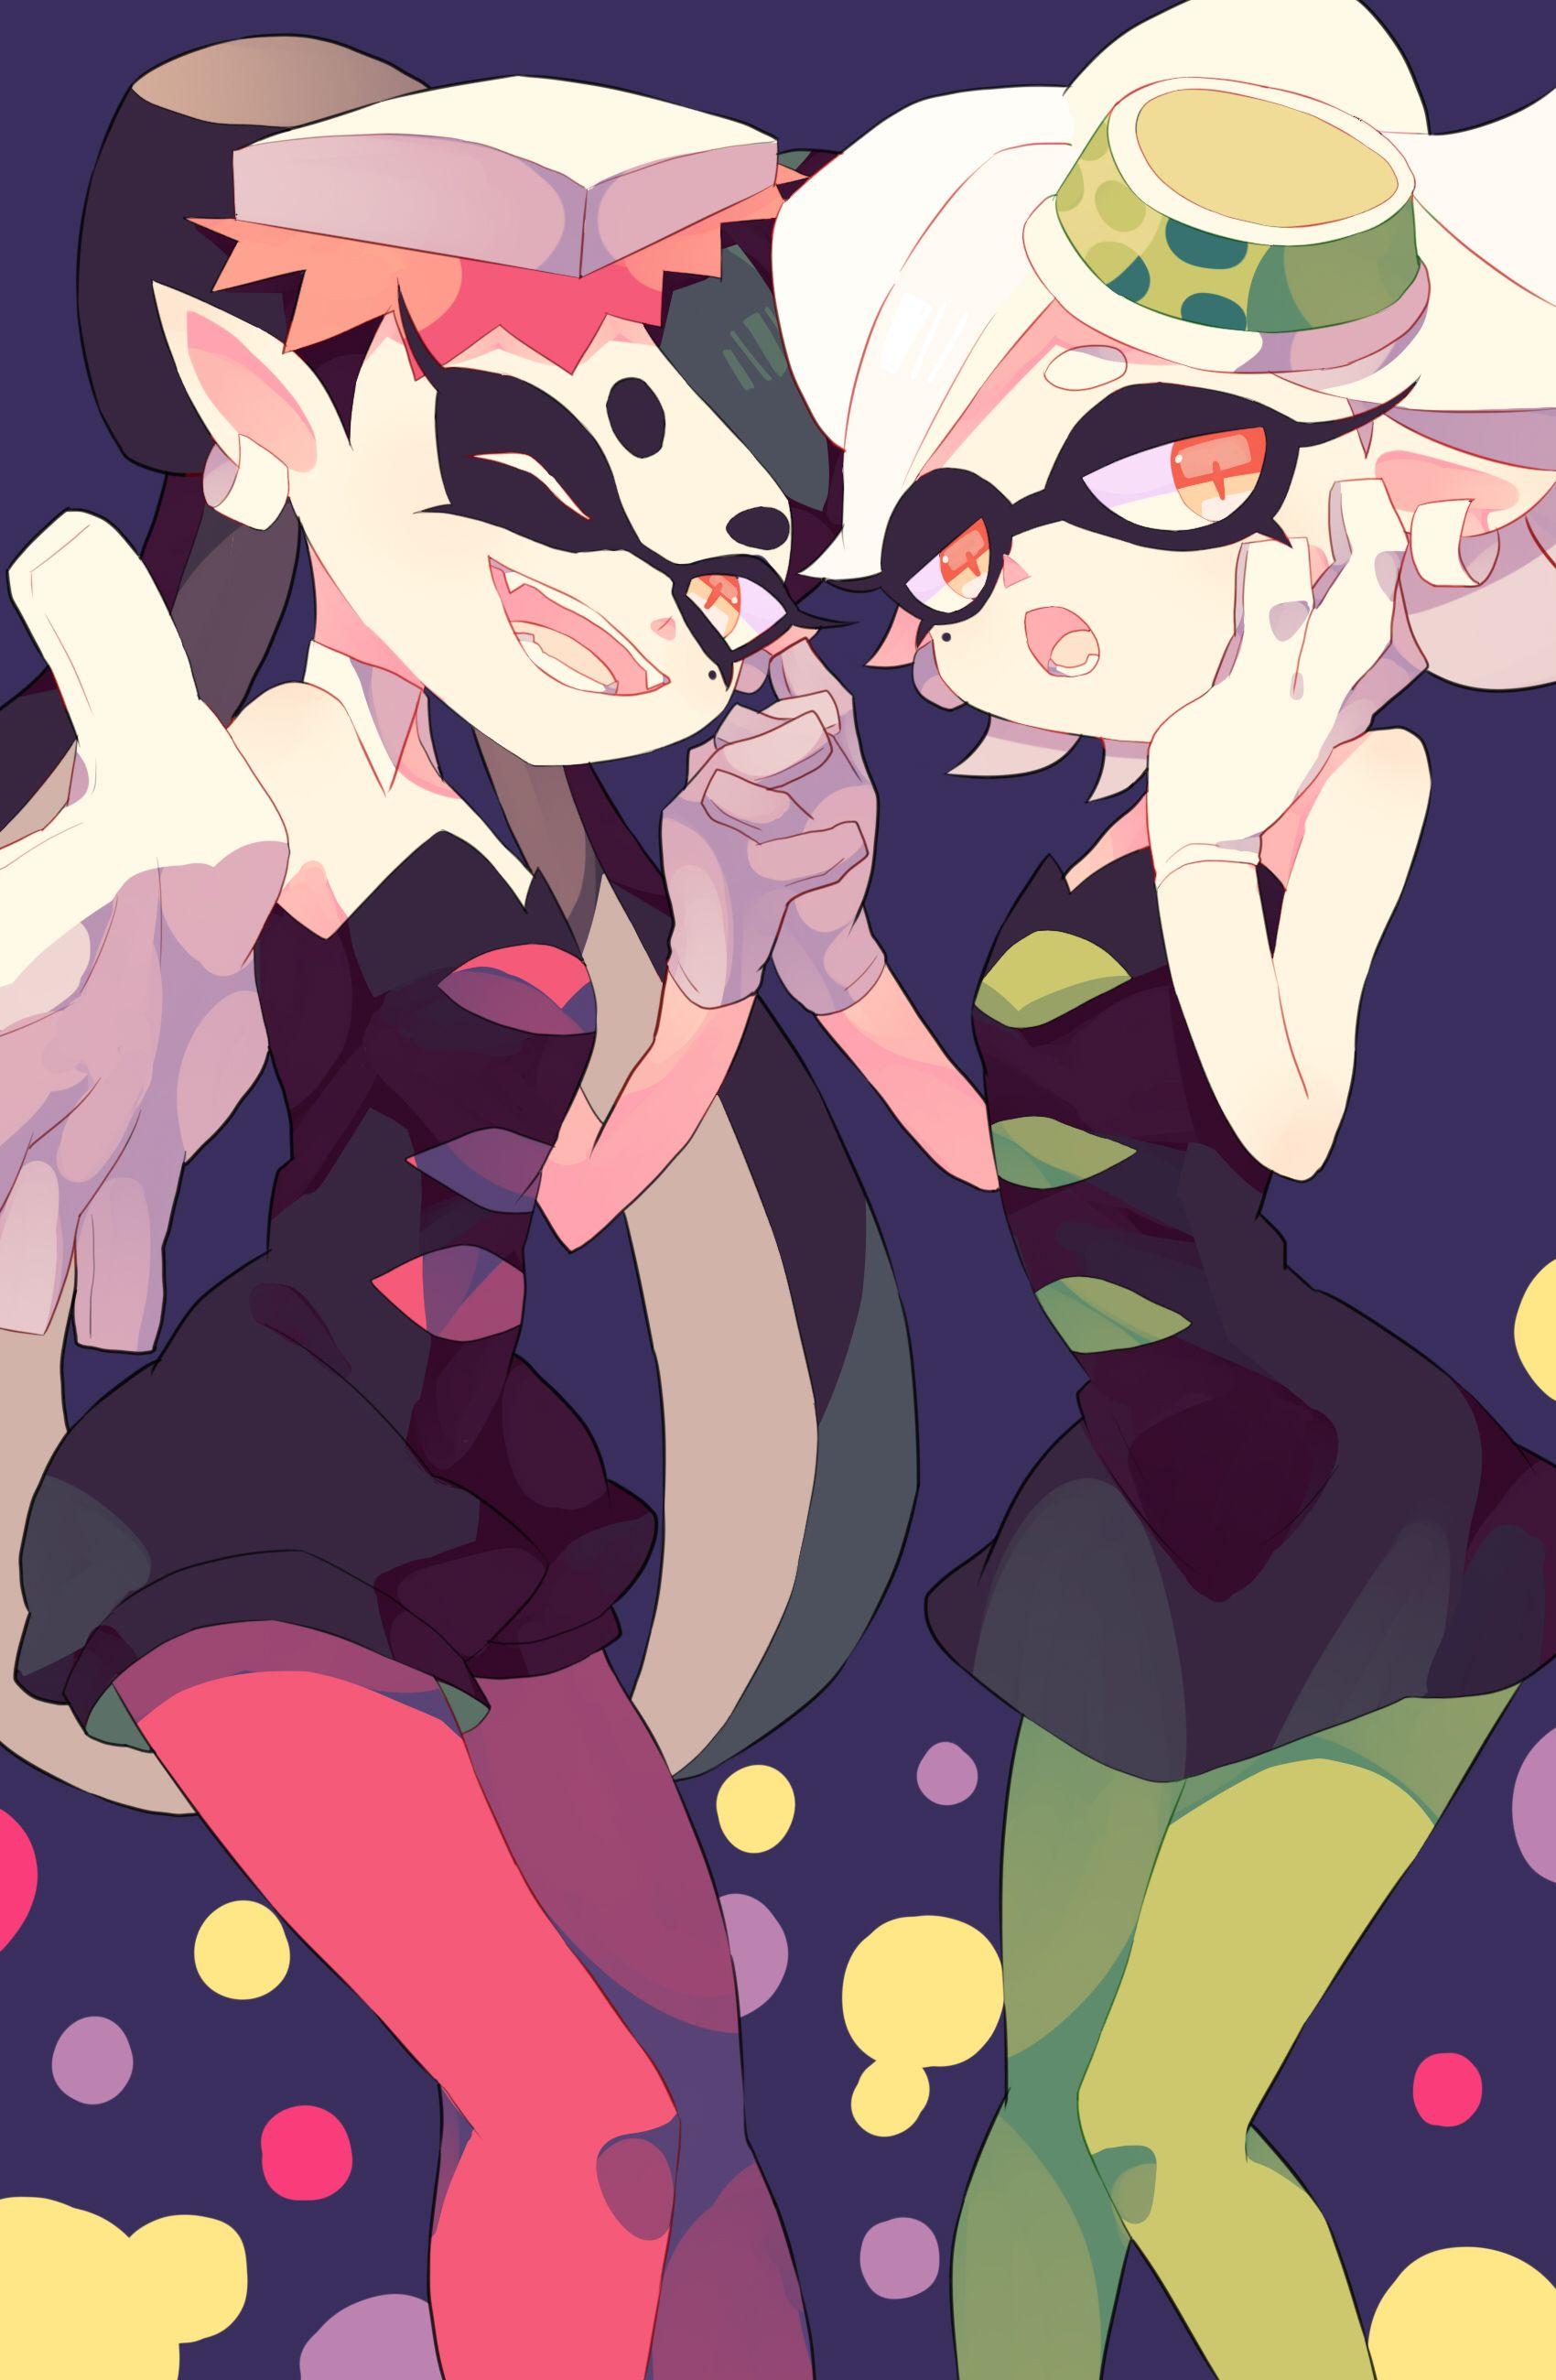 Some more Squid Sisters. 